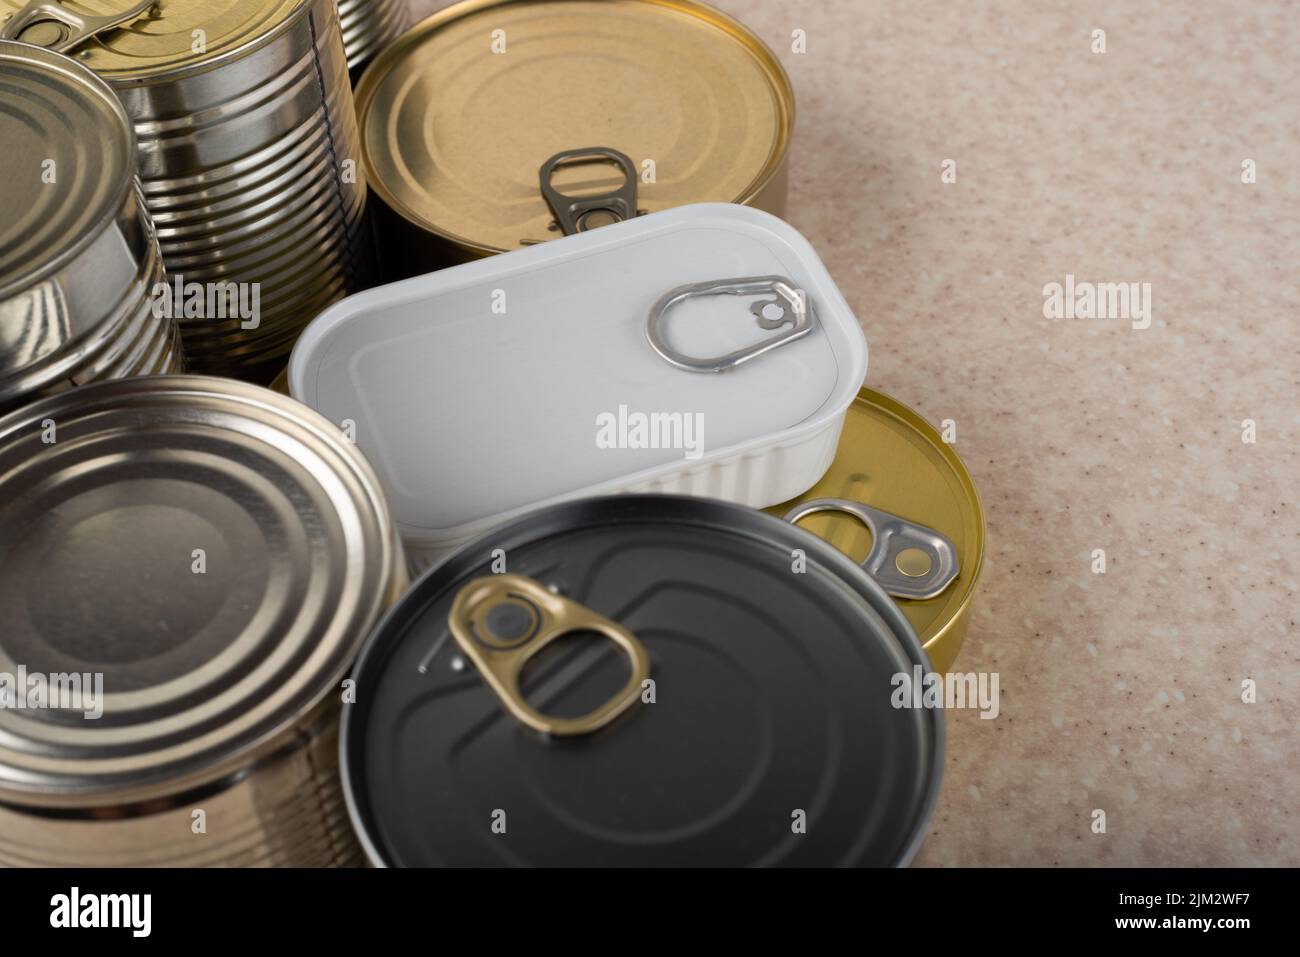 Tin cans on kitchen table background with copy space Stock Photo